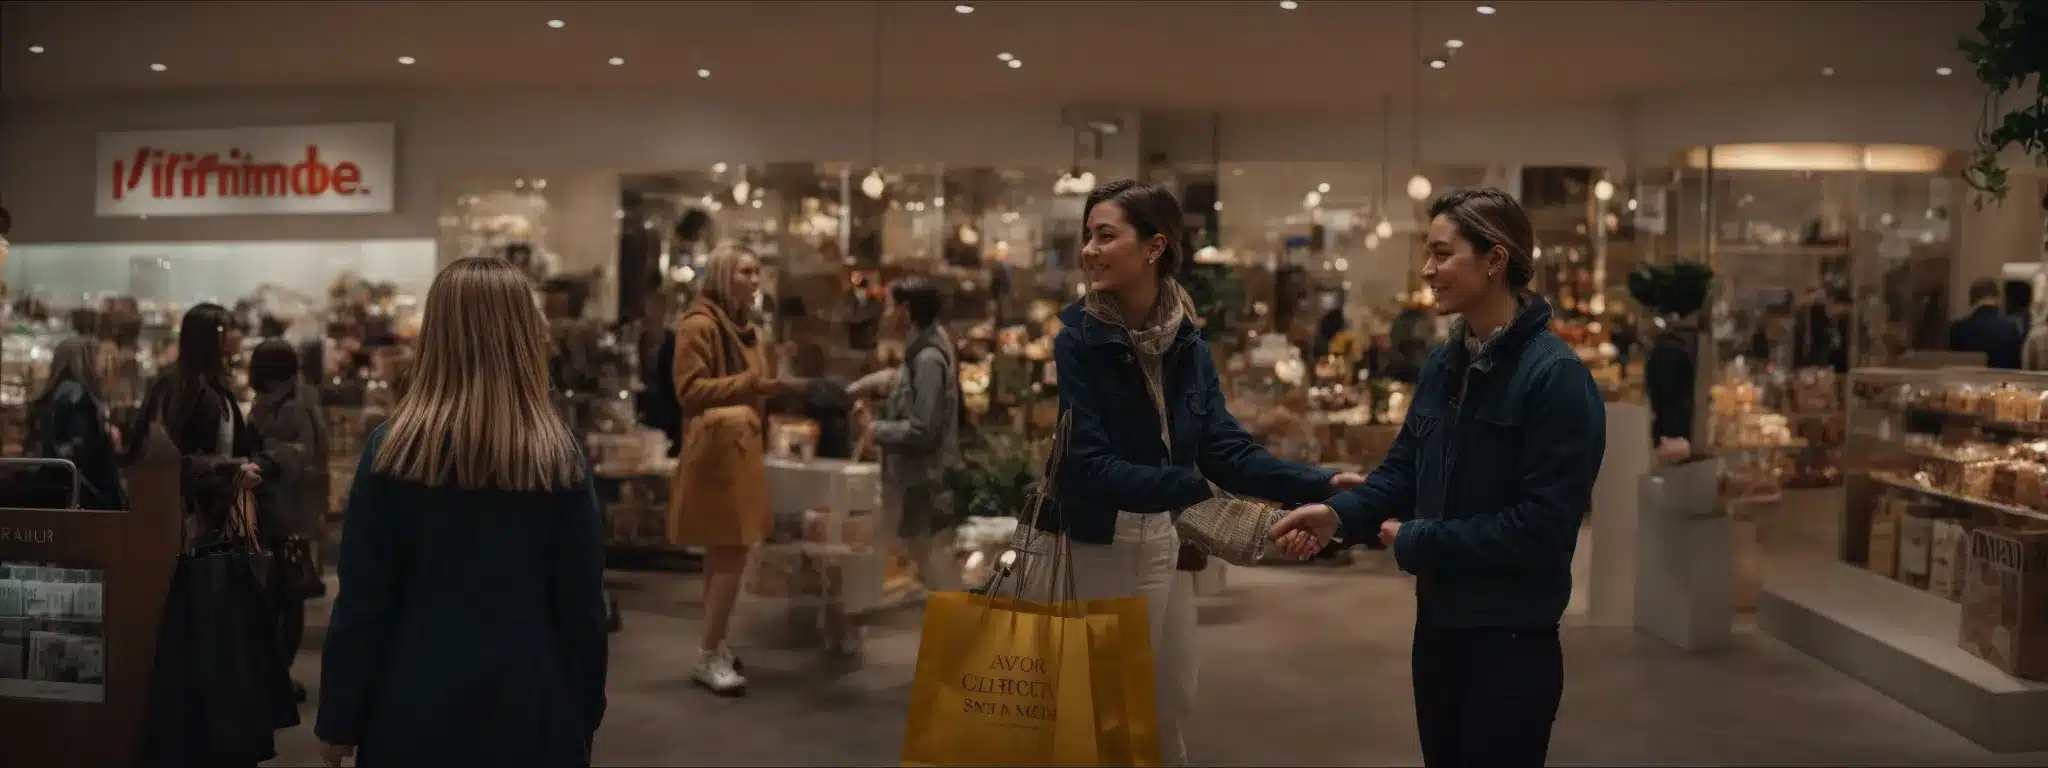 A Customer And Brand Representative Shake Hands In A Warmly Lit Store, Surrounded By Satisfied Patrons Immersed In Their Shopping Experience.